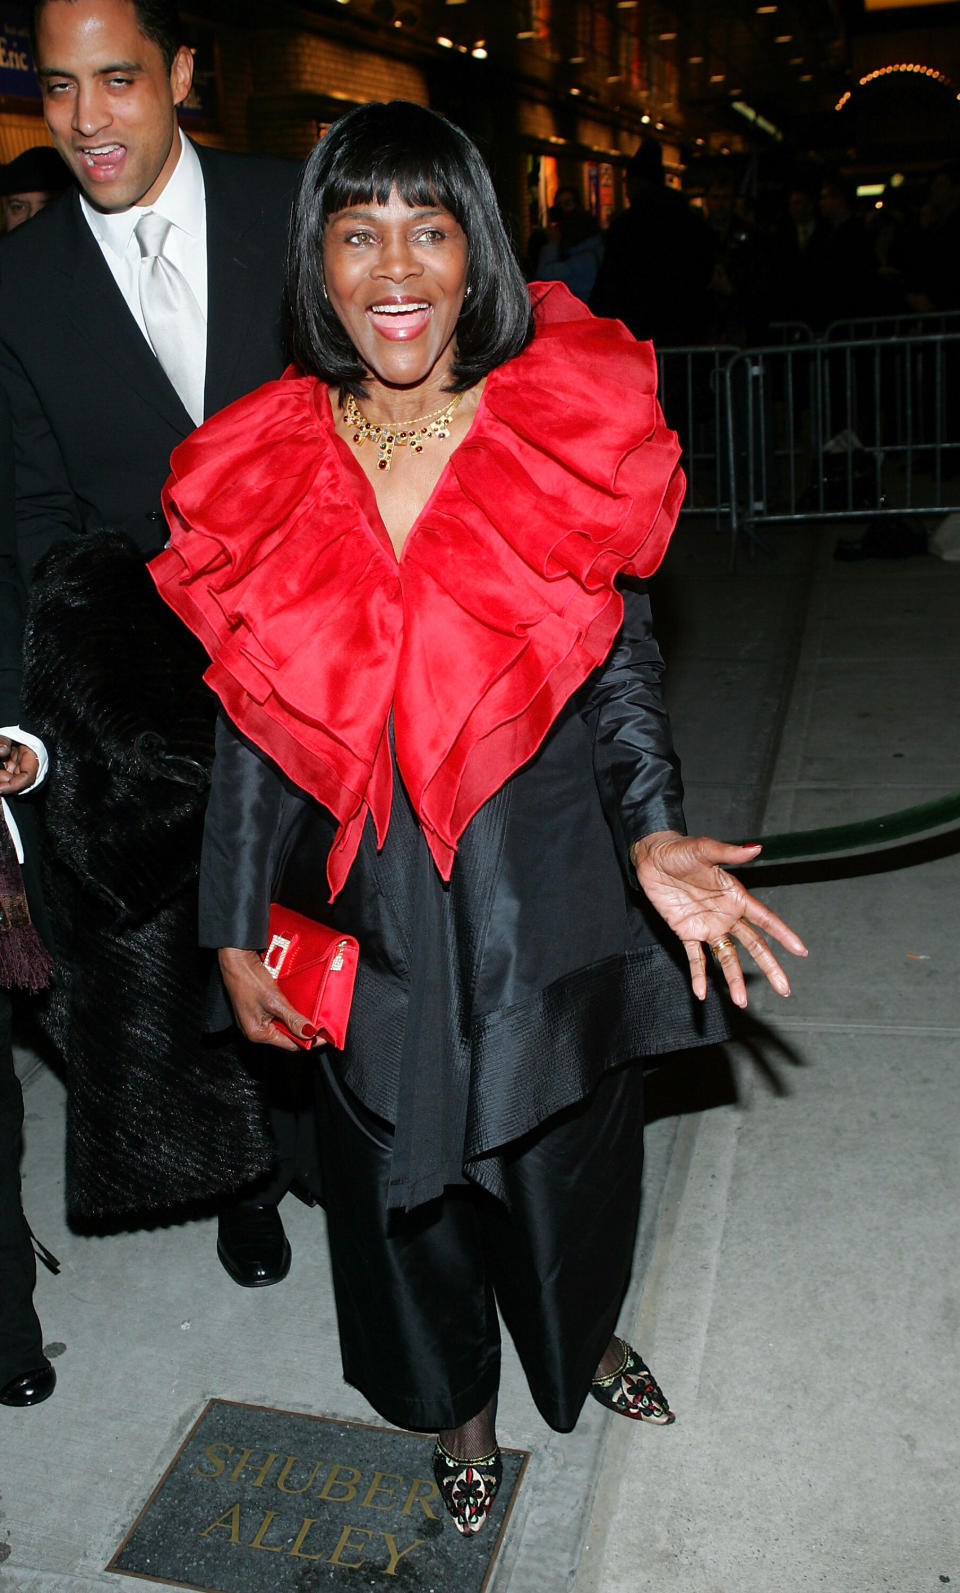 Cicely Tyson at the opening night of "Monty Python's Spamalot" in New York City on March 17, 2005.  